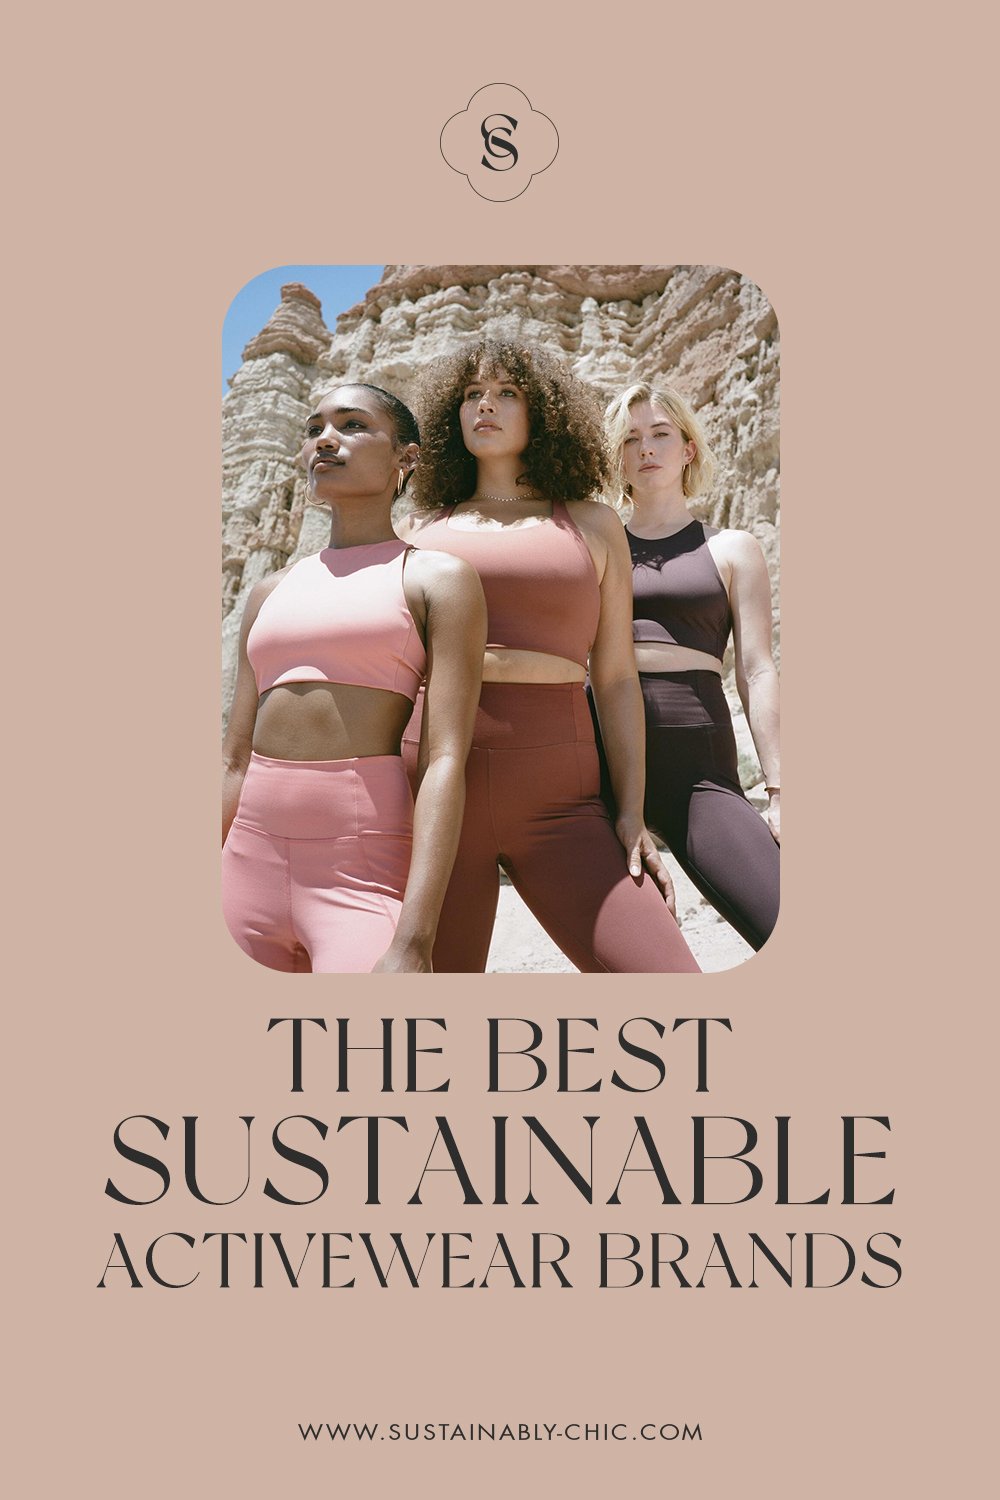 We Tried the 10 Best Sustainable Activewear Brands